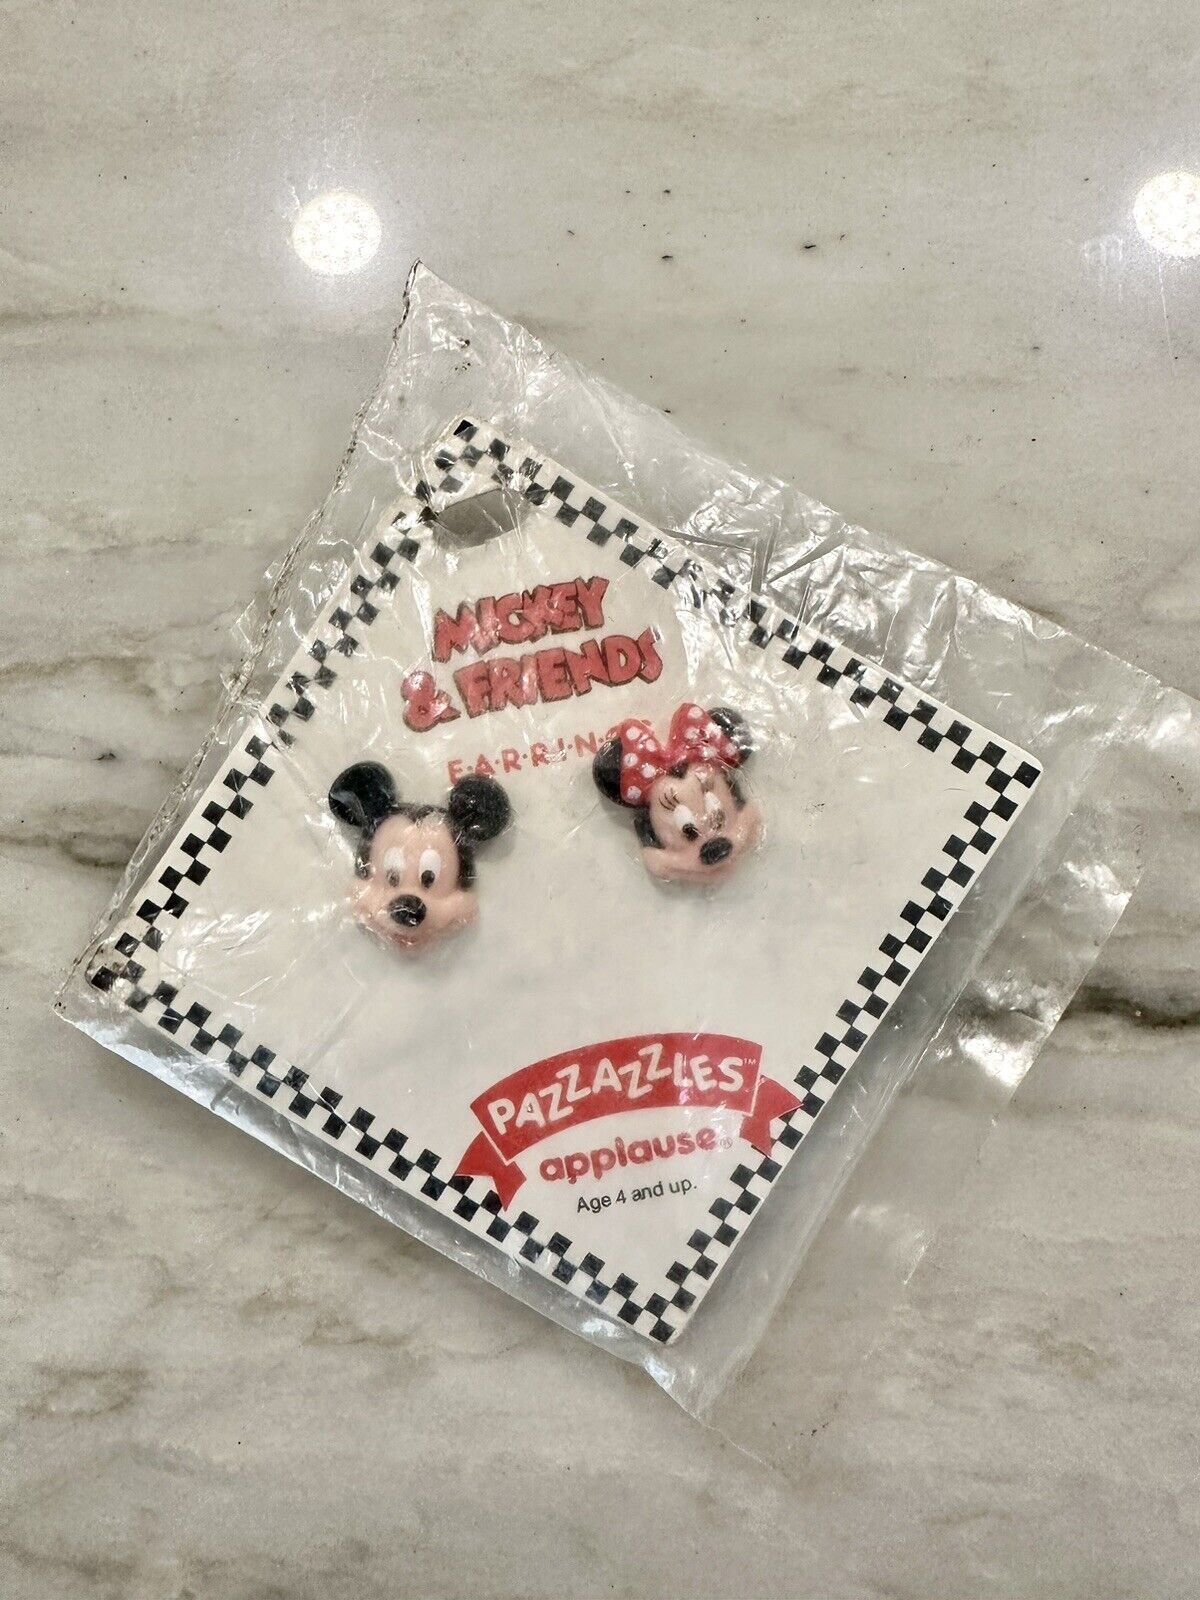 1990’s Mickey Minnie Mouse Disney Earrings Pazzazzles Applause Unopened Package